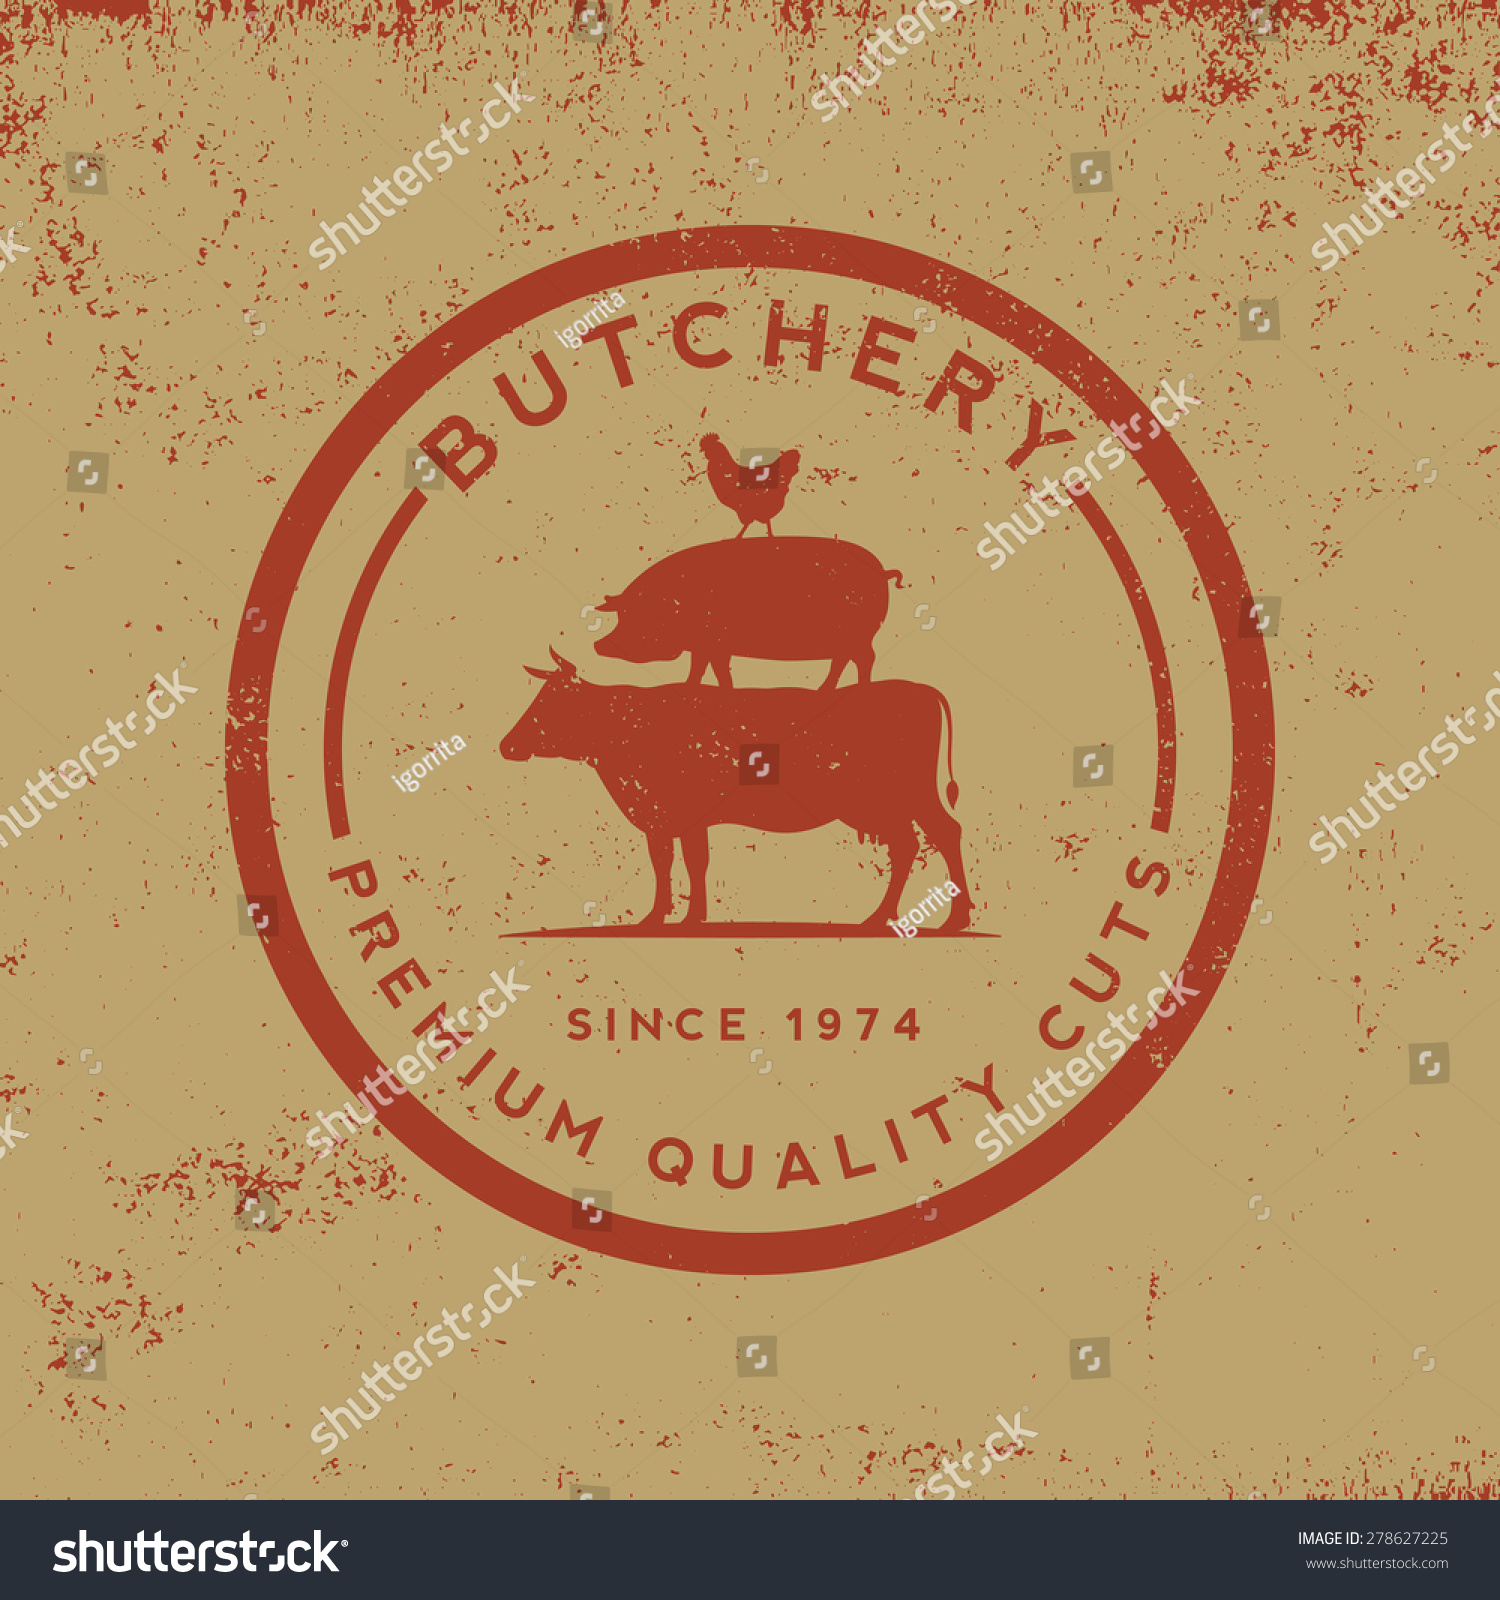 Butchery Label On Grunge Background Stock Vector (Royalty Free ...